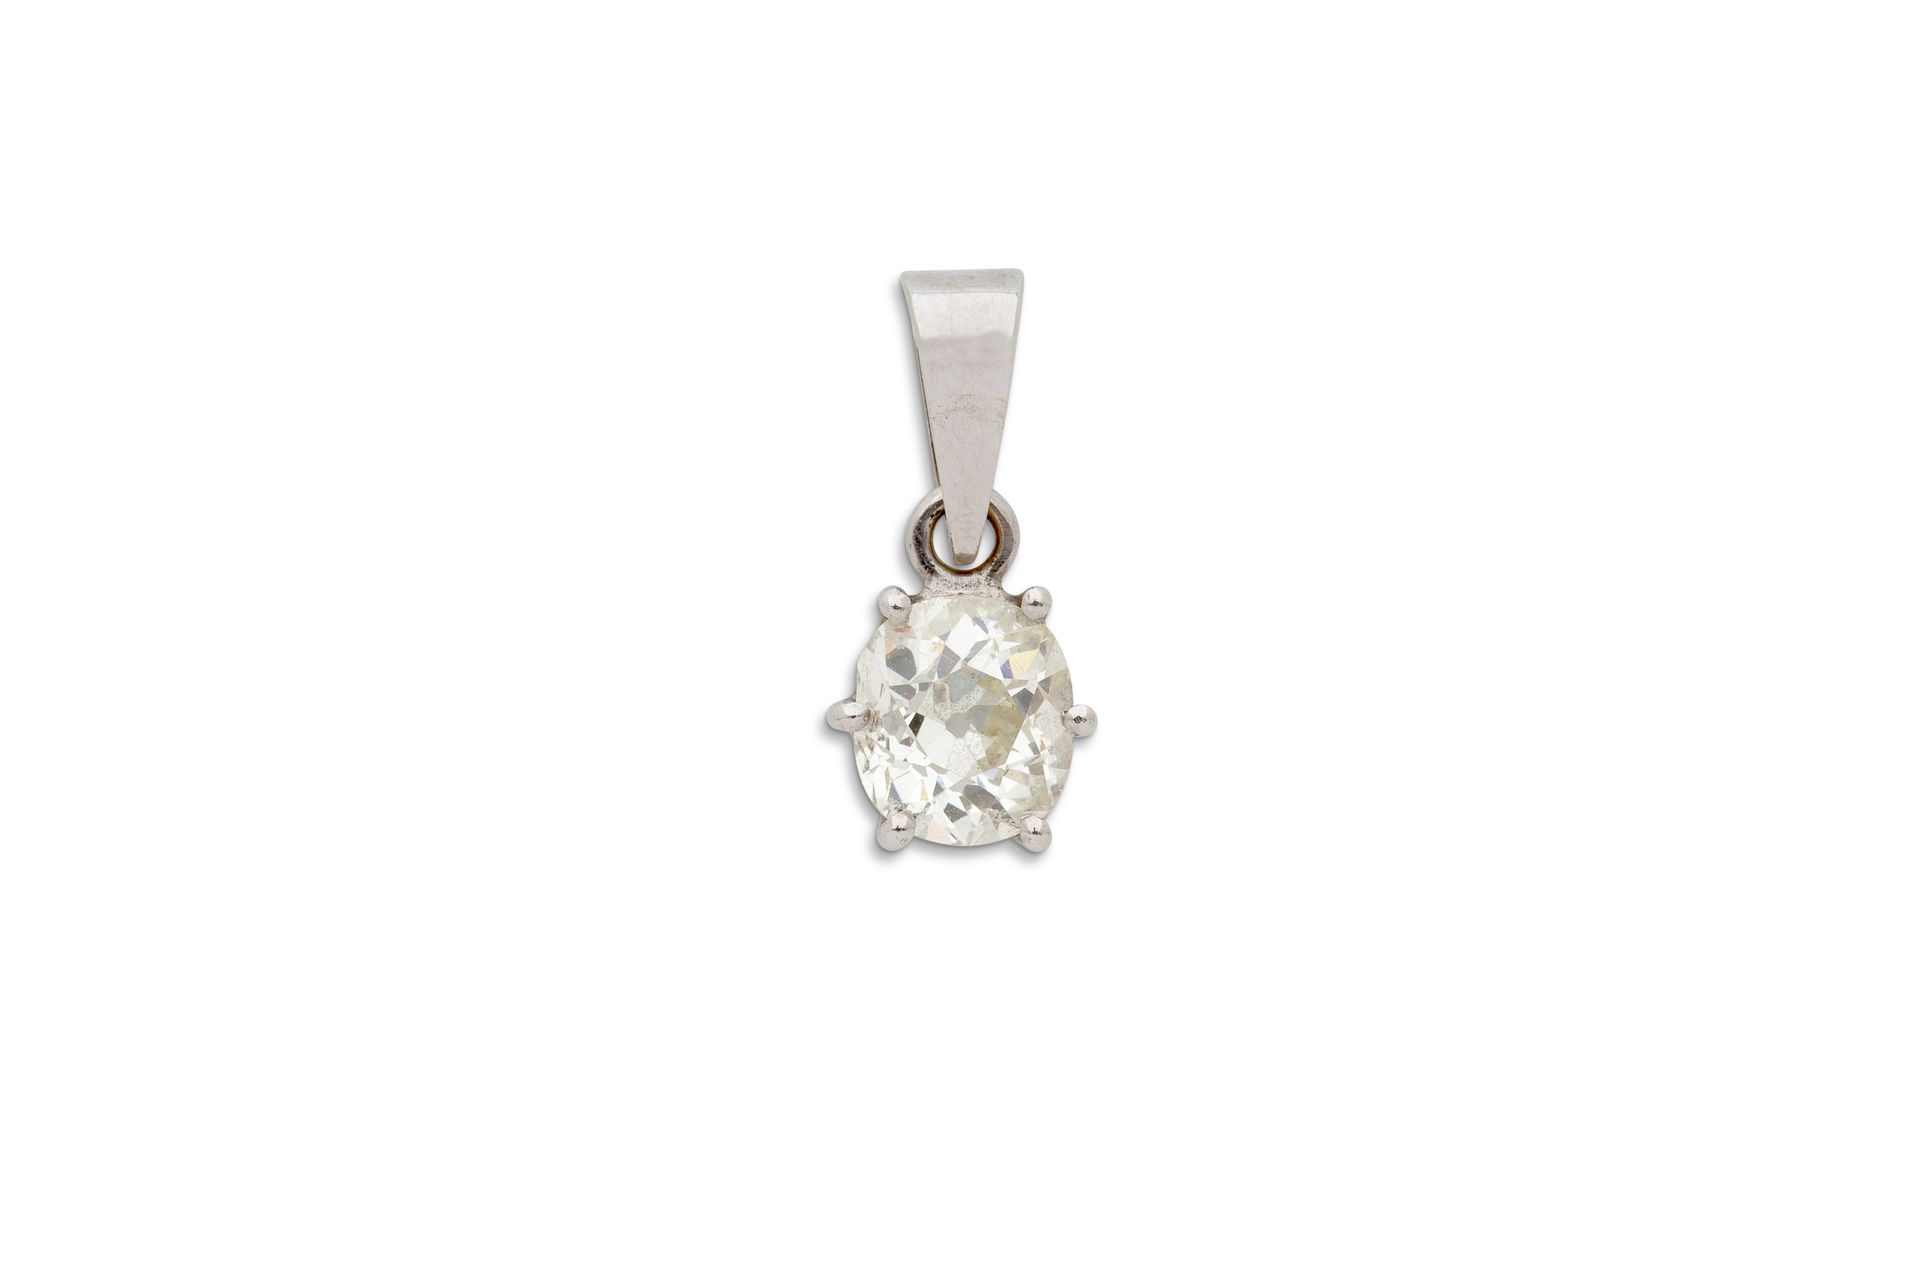 Pendentif "Diamant" Pendentif "Diamant"
Diamants coussin taille ancienne
Or 18k &hellip;